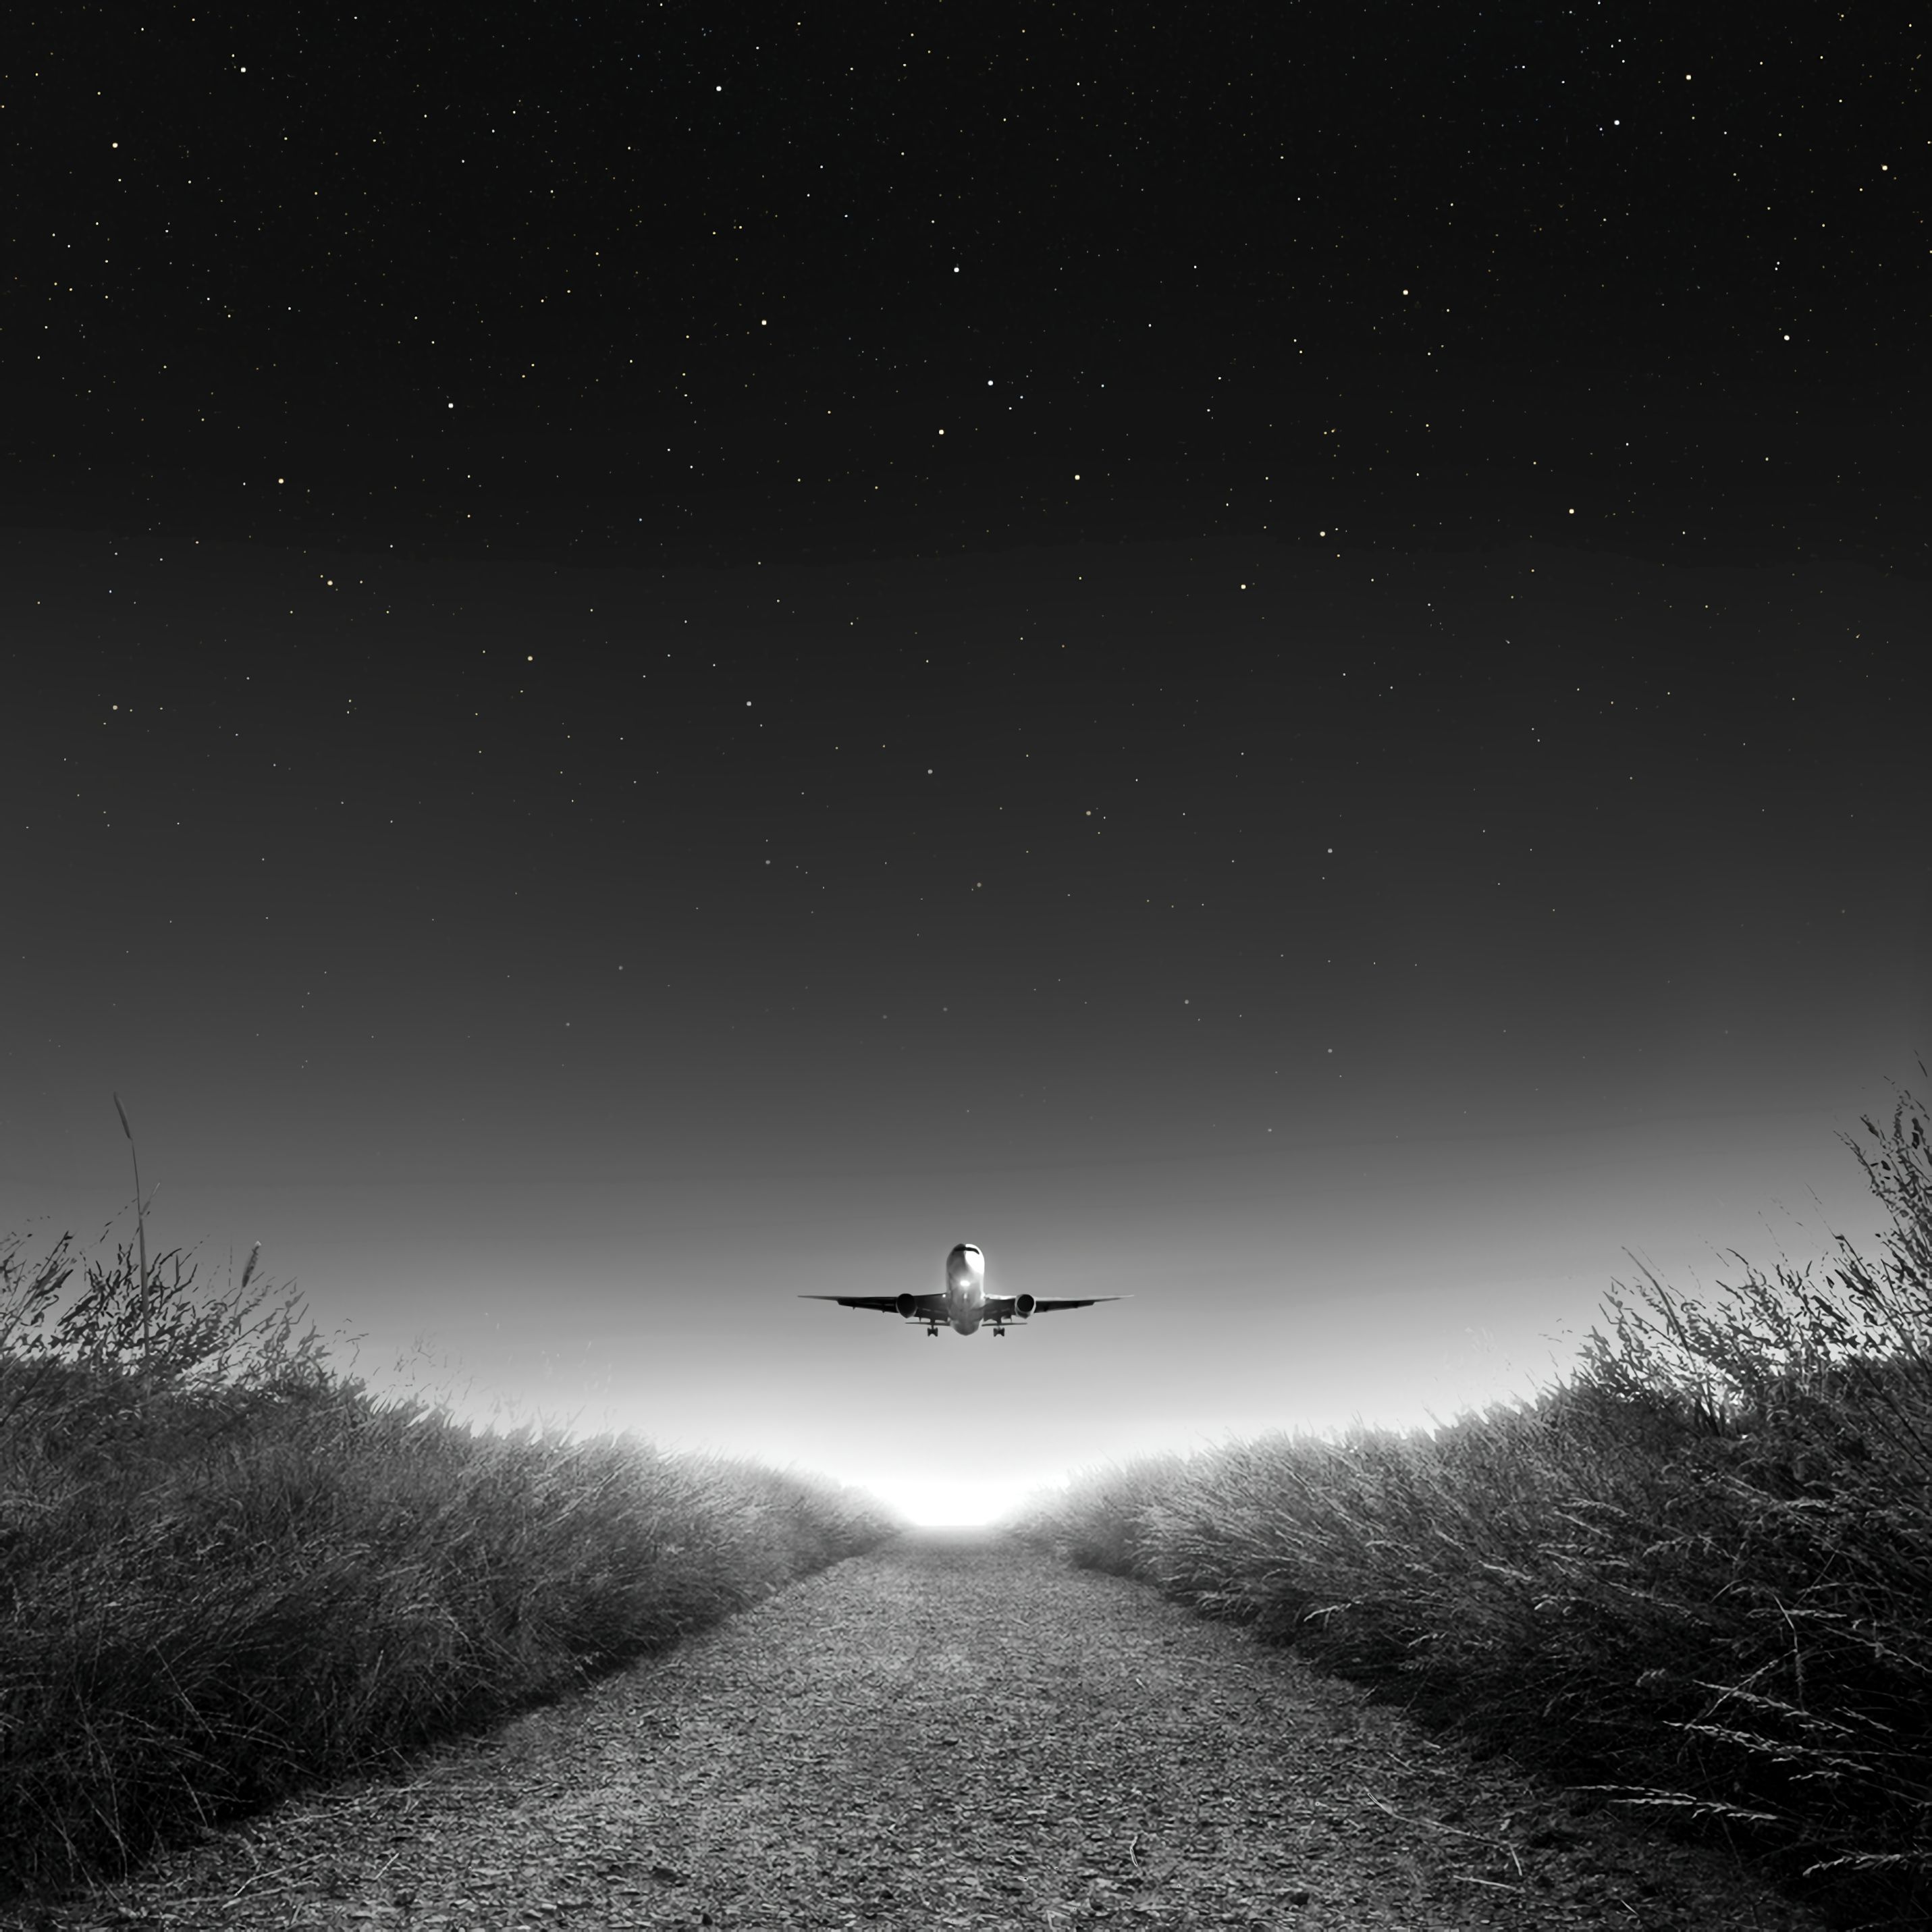 Wallpaper for mobile devices takeoff, photoshop, starry sky, airplane